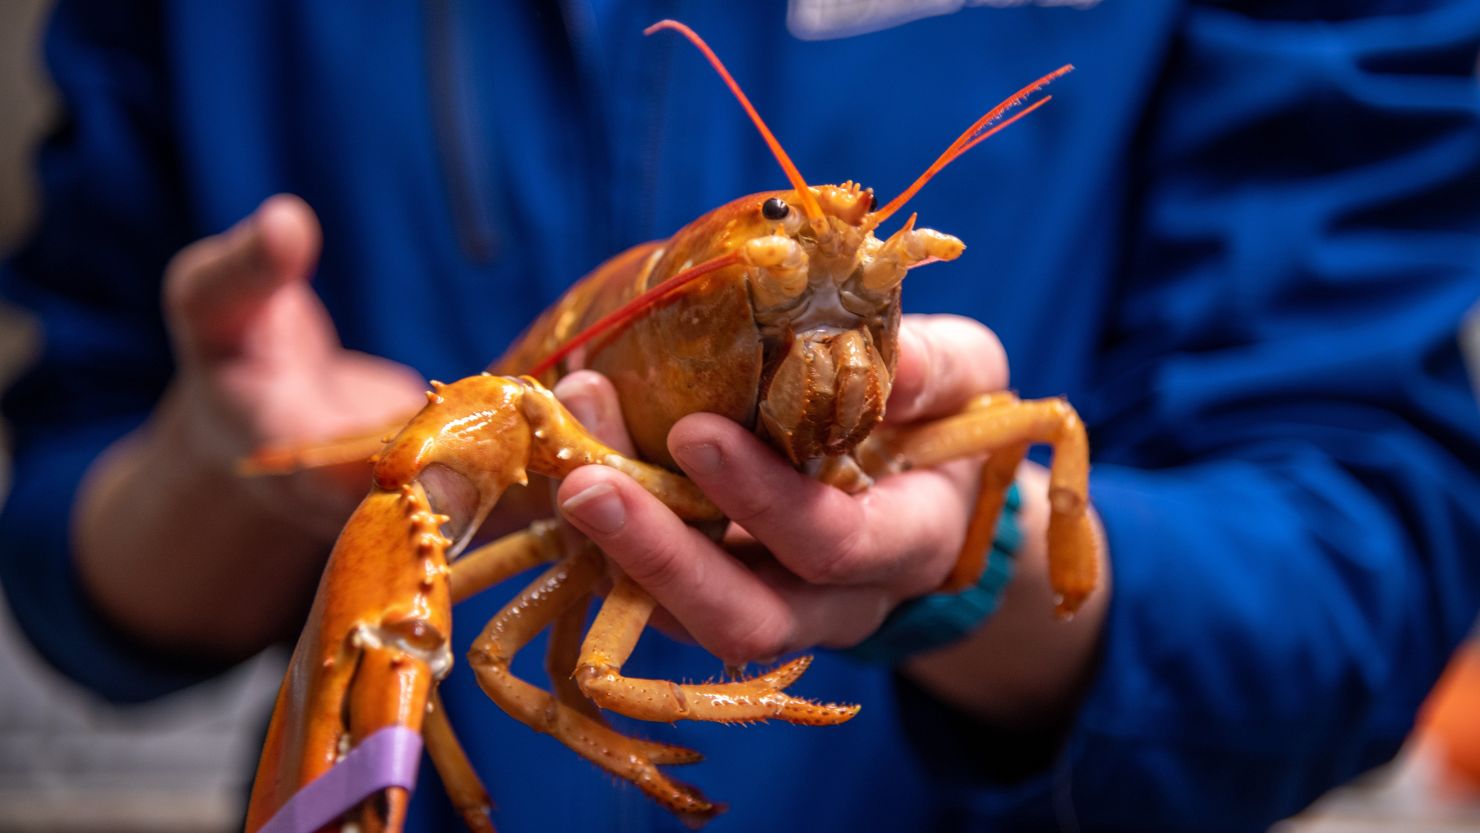 A one-in-30 million lobster was caught in Maine's Casco Bay on June 2.